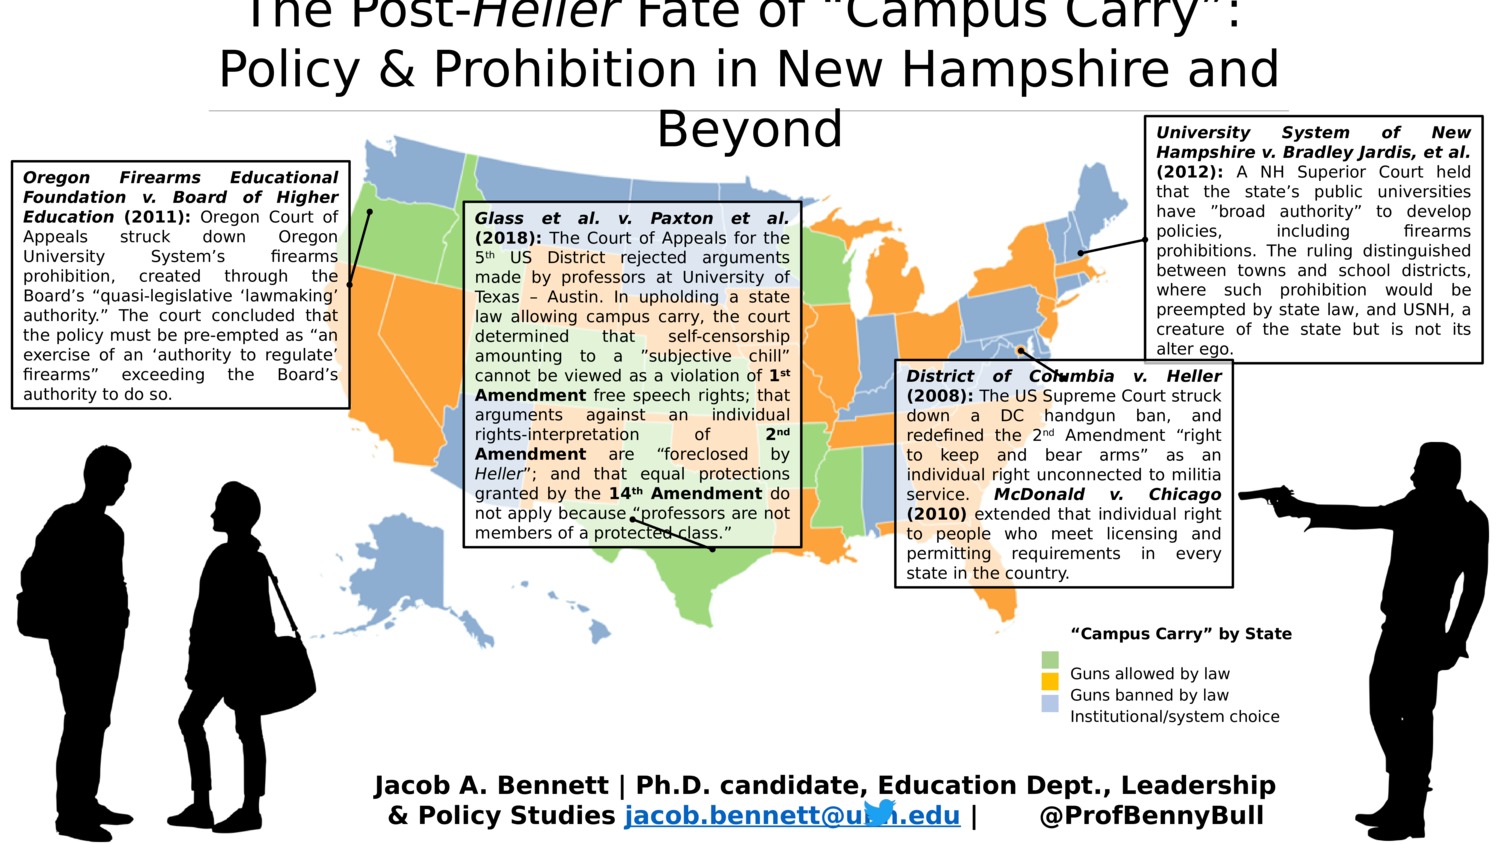 Post-Heller Fate Of "Campus Carry": Policy & Prohibition In New Hampshire And Beyond by jb1228